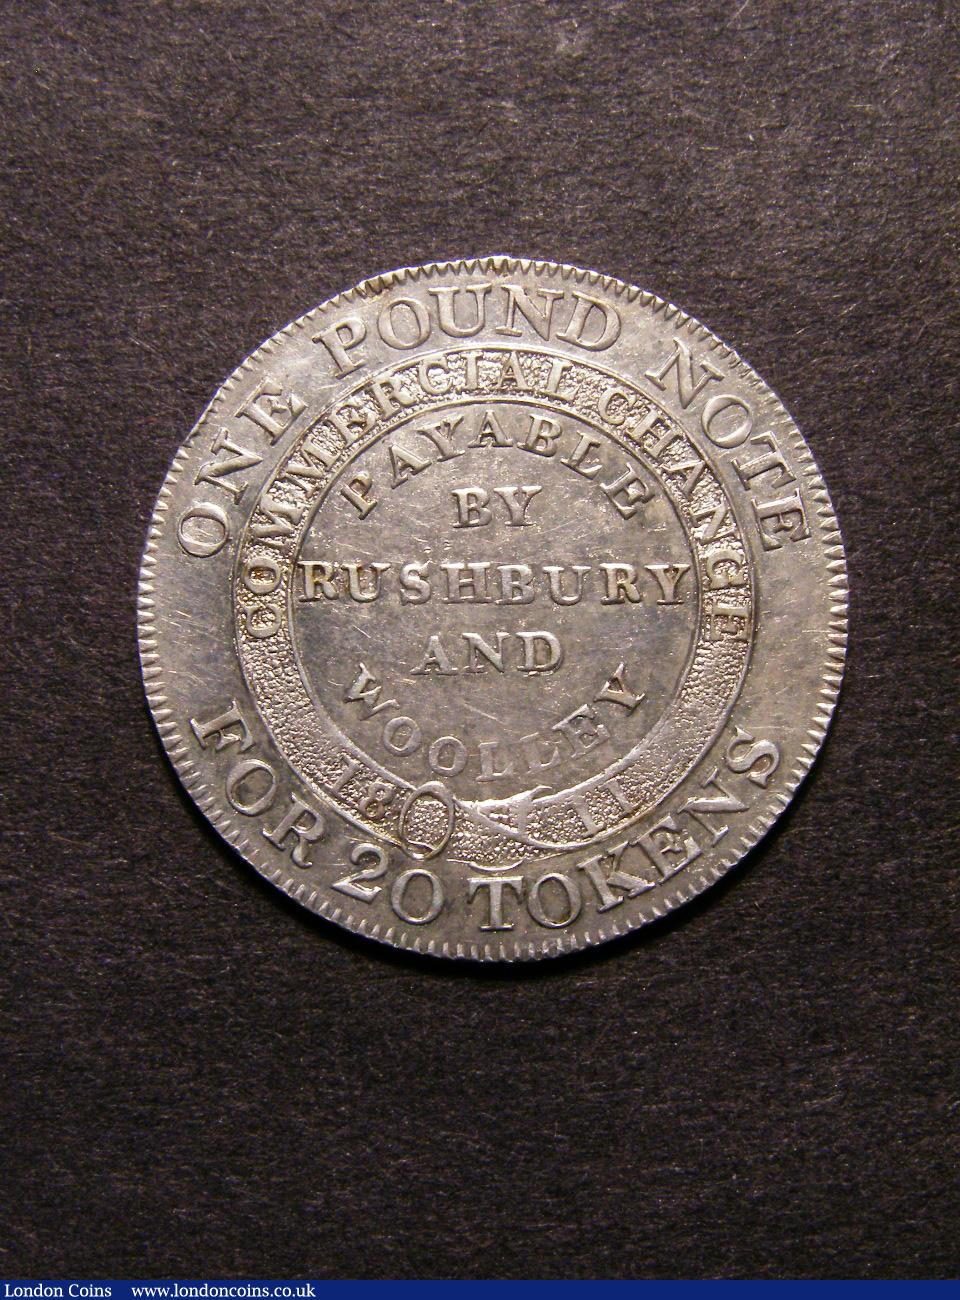 Shilling 1811 Bilston Silver Token payable by Rushburyand Woolley EF : Tokens : Auction 129 : Lot 924